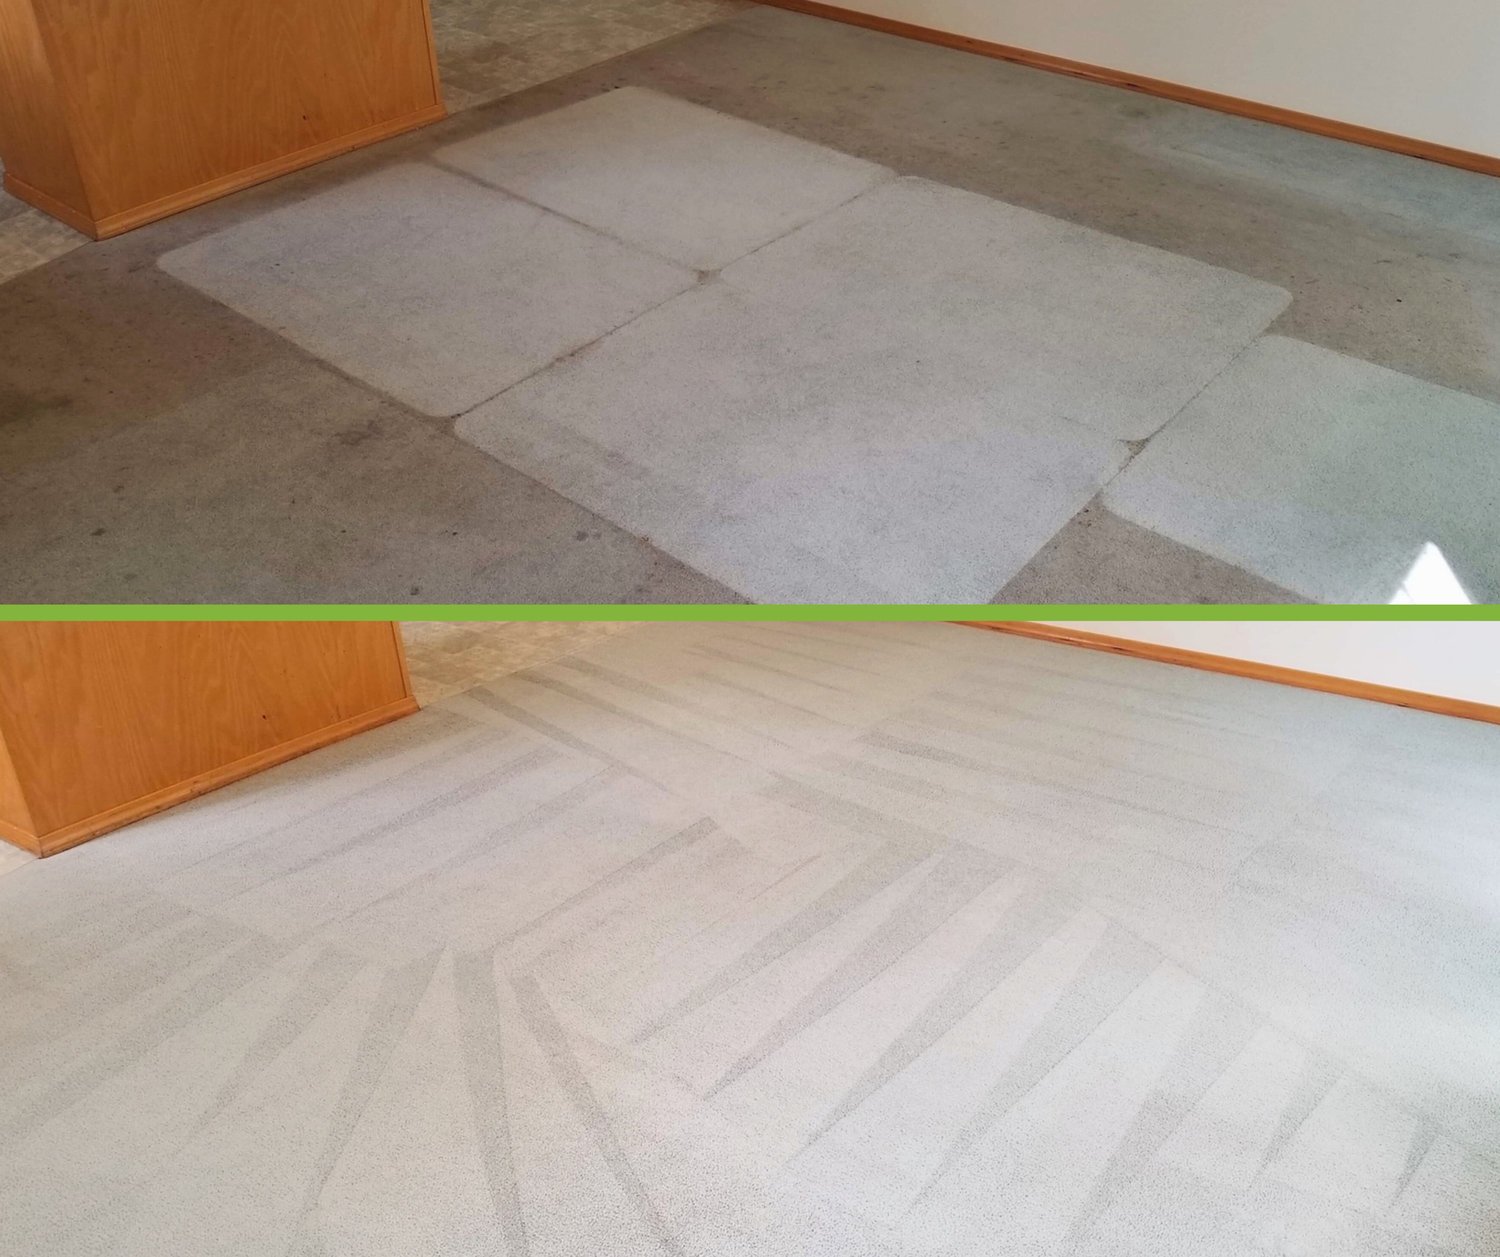 Professional Carpet Cleaning Before and After